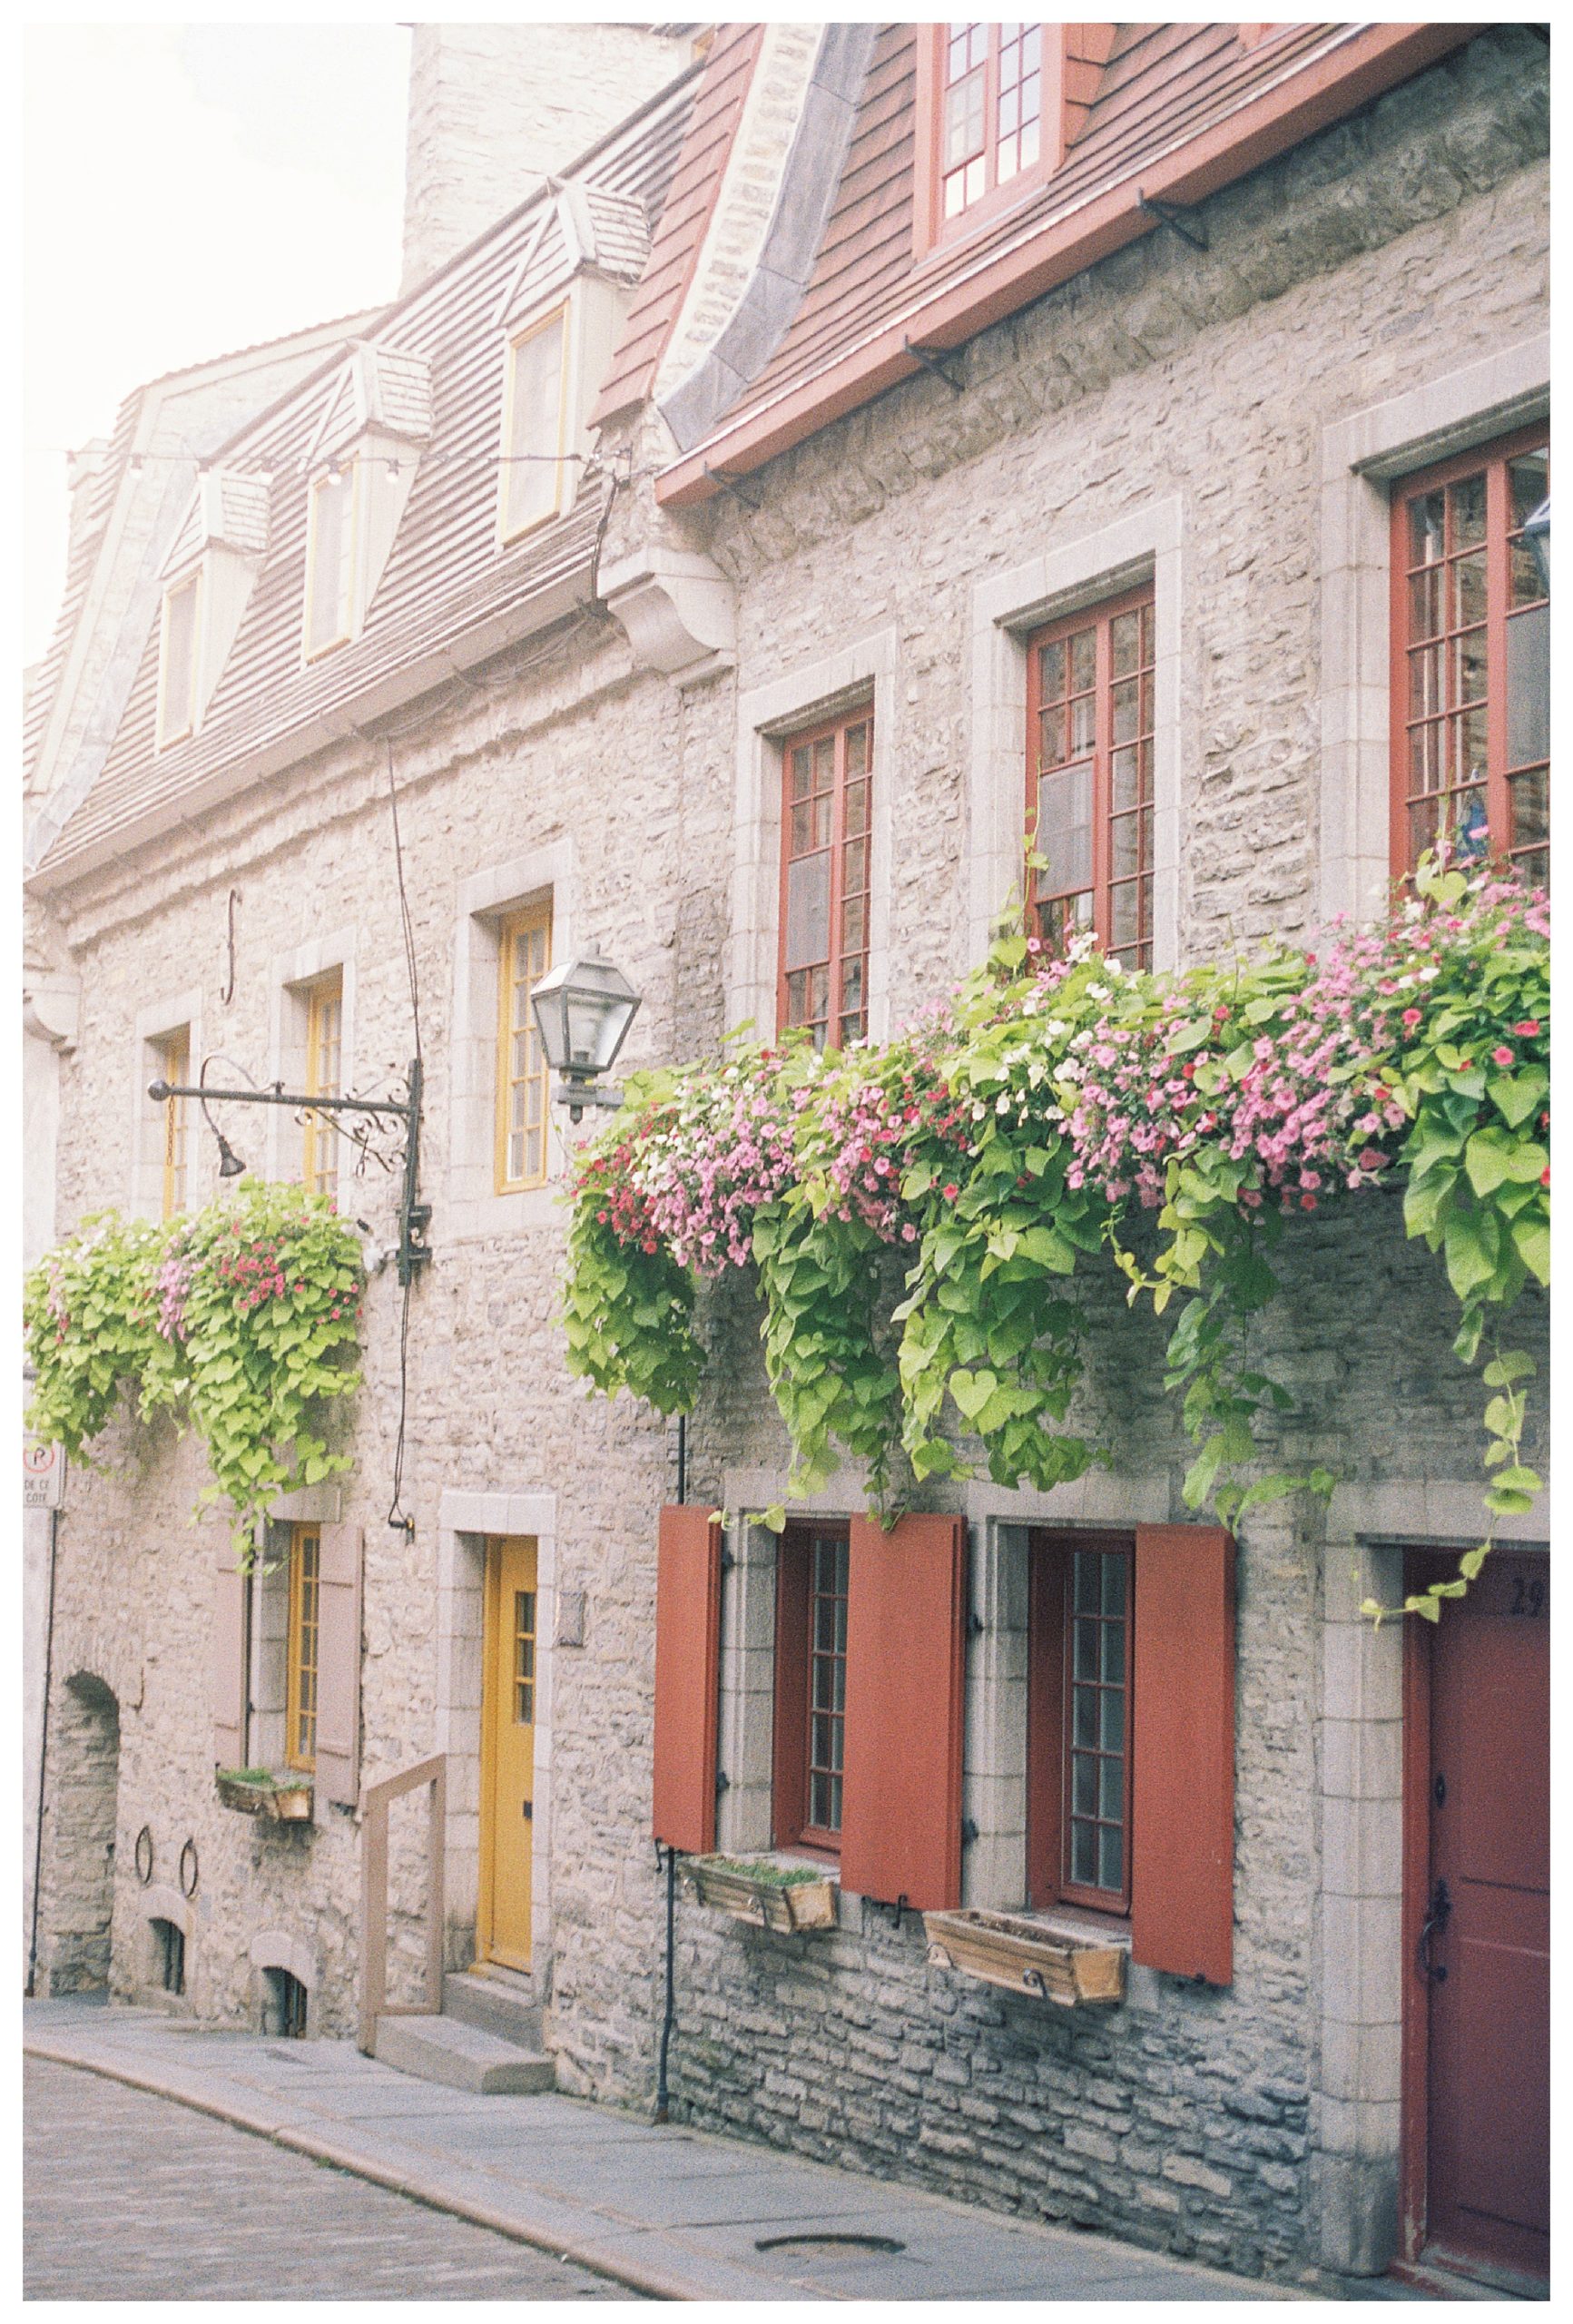 Exterior of old stone buildings with window floral boxes in Quebec City.